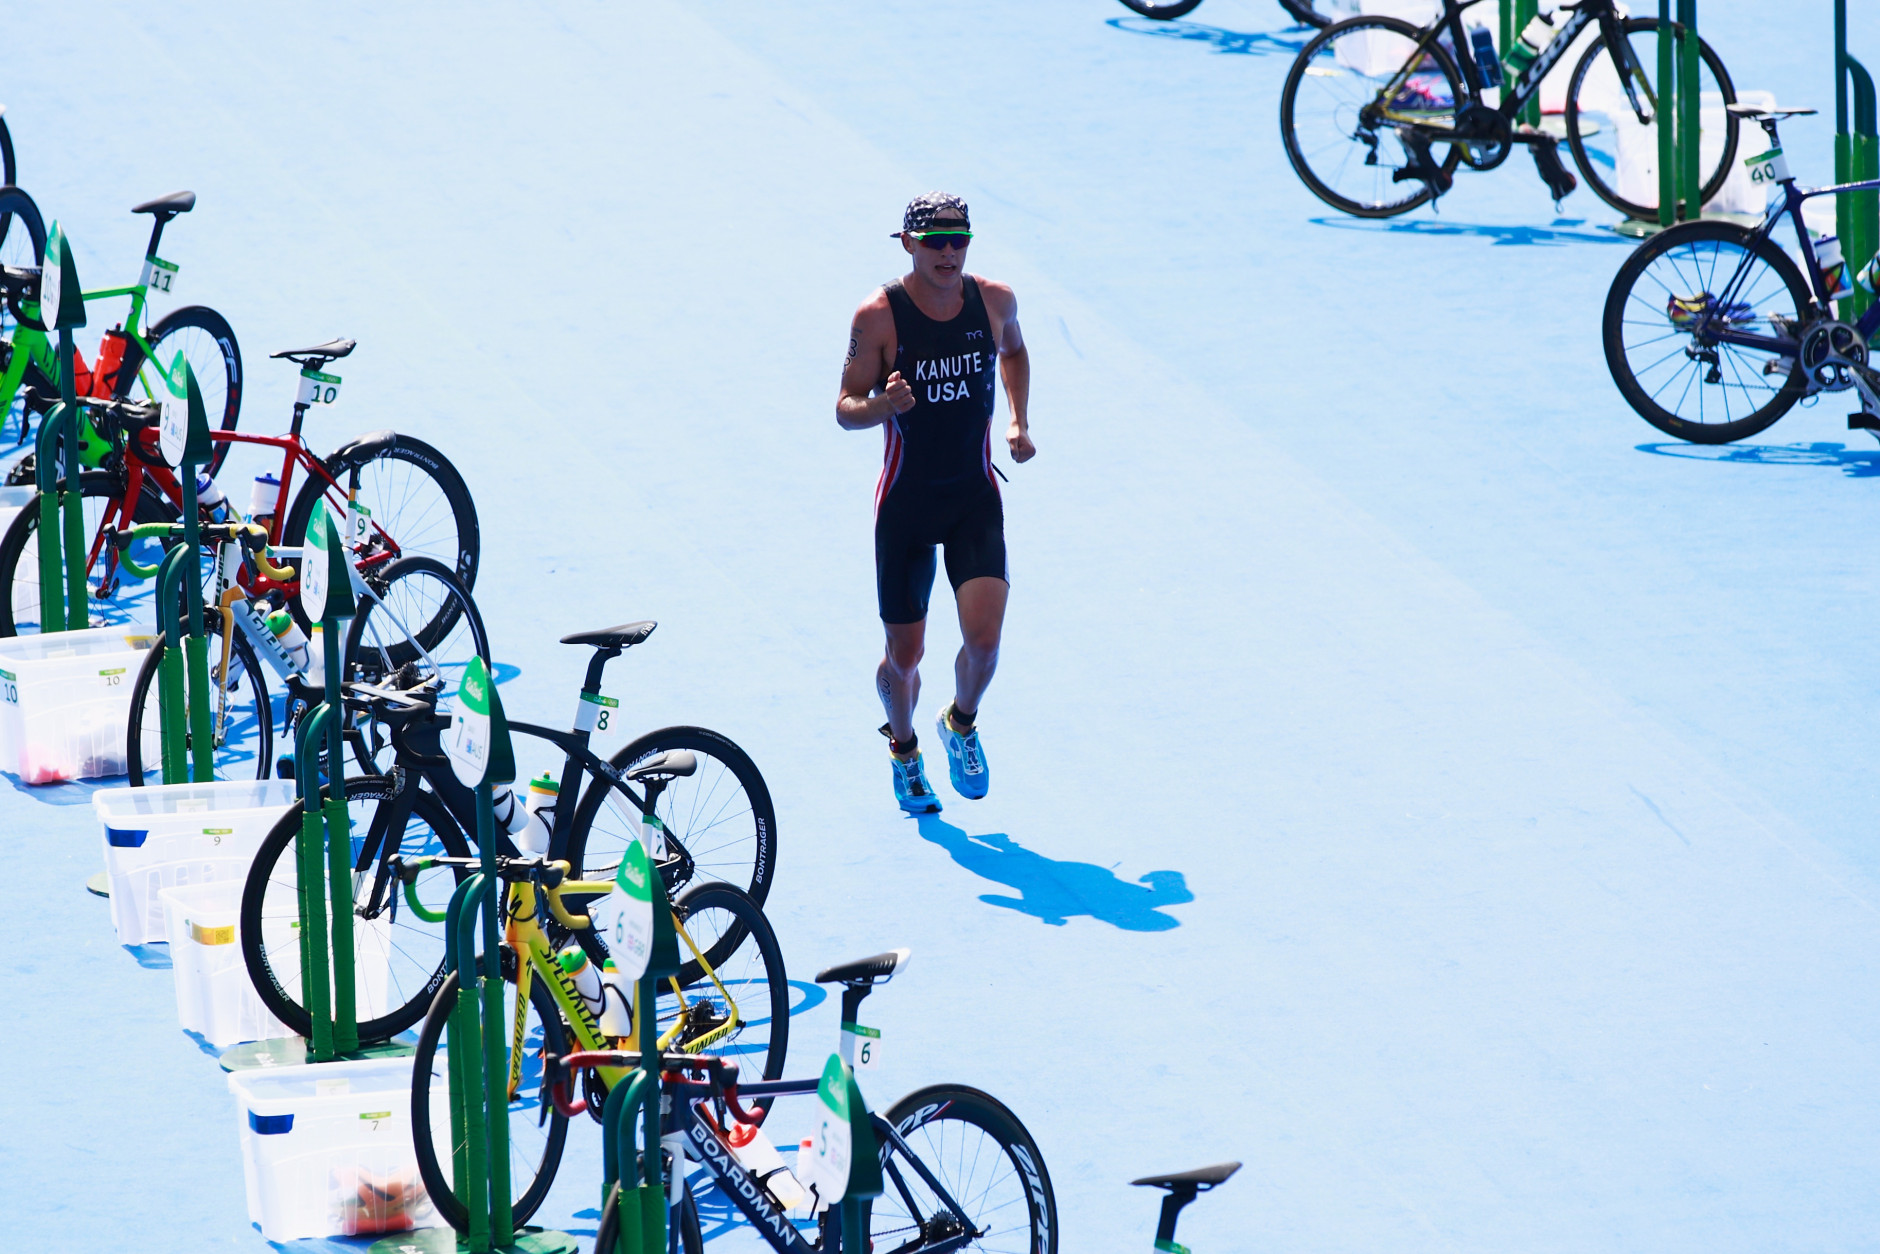 RIO DE JANEIRO, BRAZIL - AUGUST 18:  Ben Kanute of the United States competes during the Men's Triathlon at Fort Copacabana on Day 13 of the 2016 Rio Olympic Games on August 18, 2016 in Rio de Janeiro, Brazil.  (Photo by Adam Pretty/Getty Images)